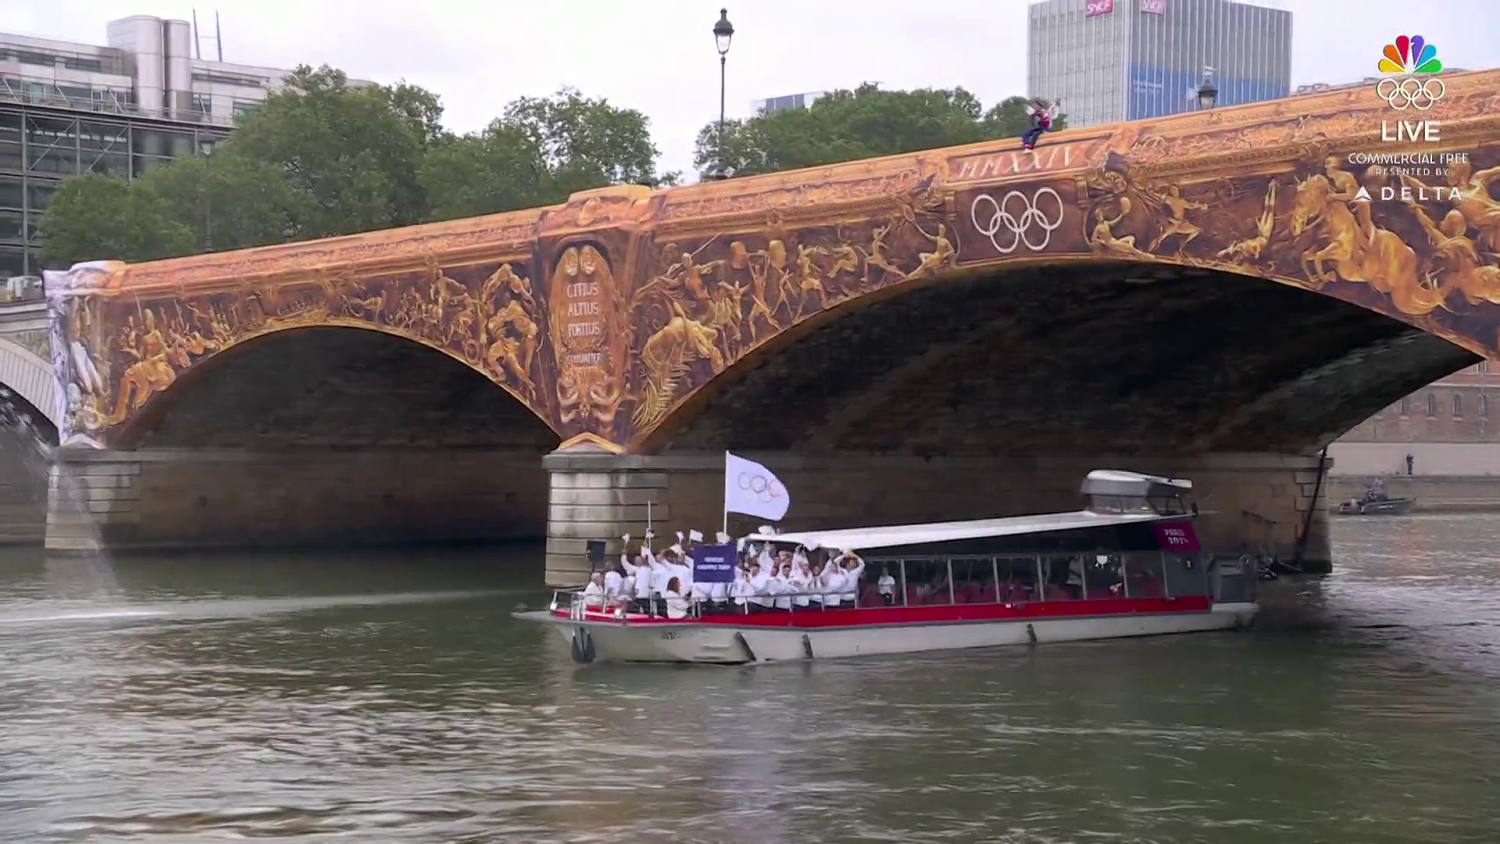 Refugee Olympic Team travels down Seine River at opening ceremony